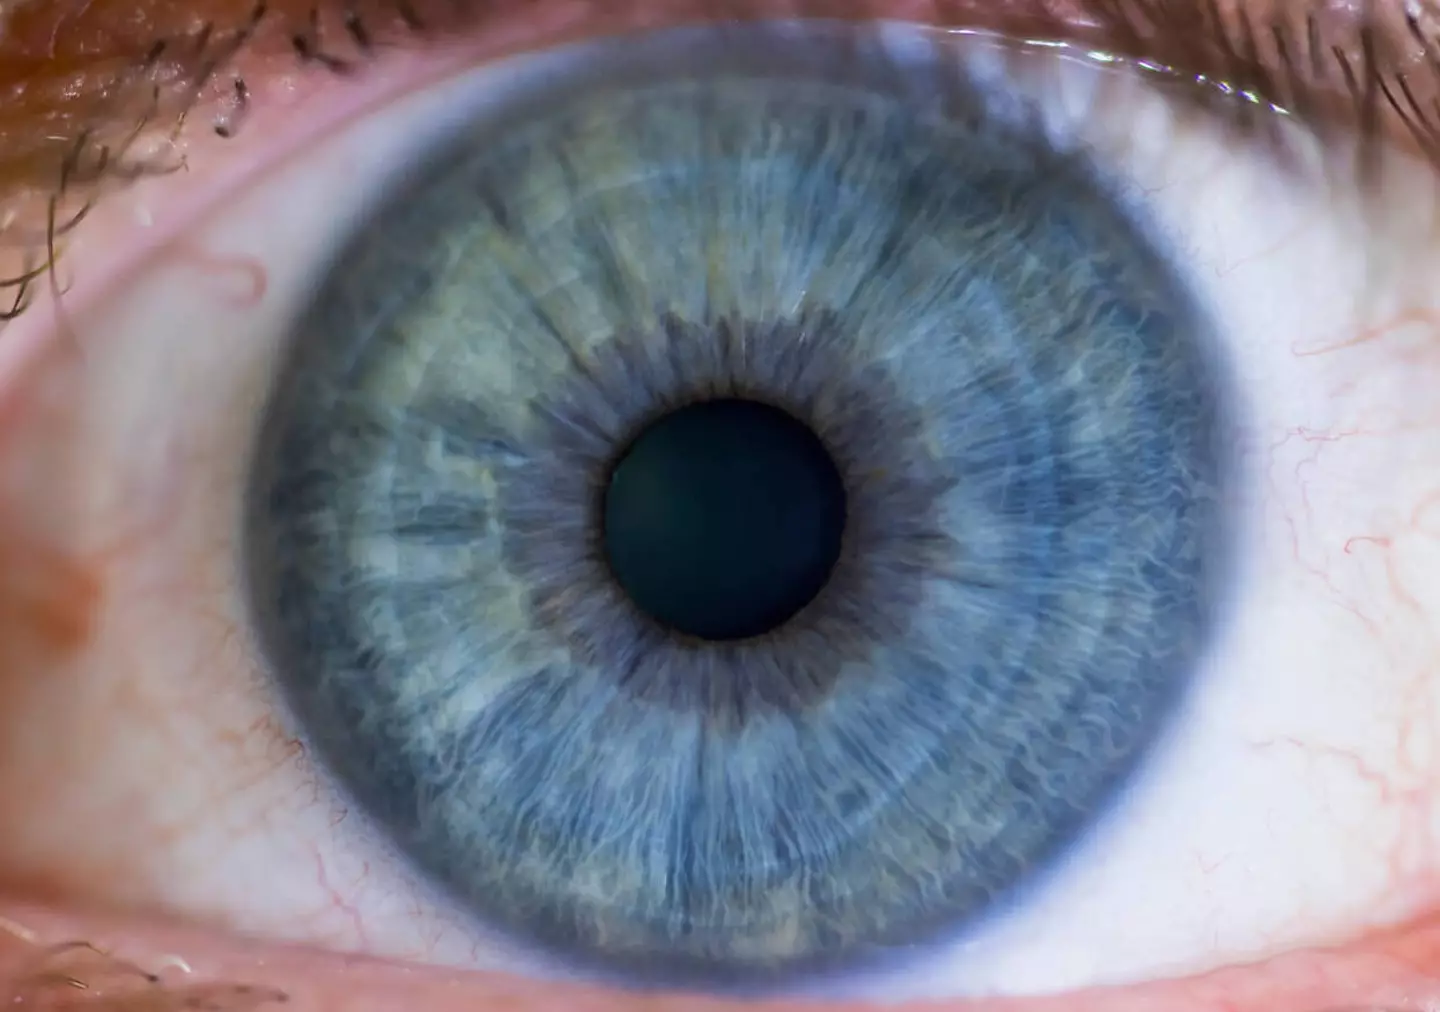 Where do blue eyes come from?